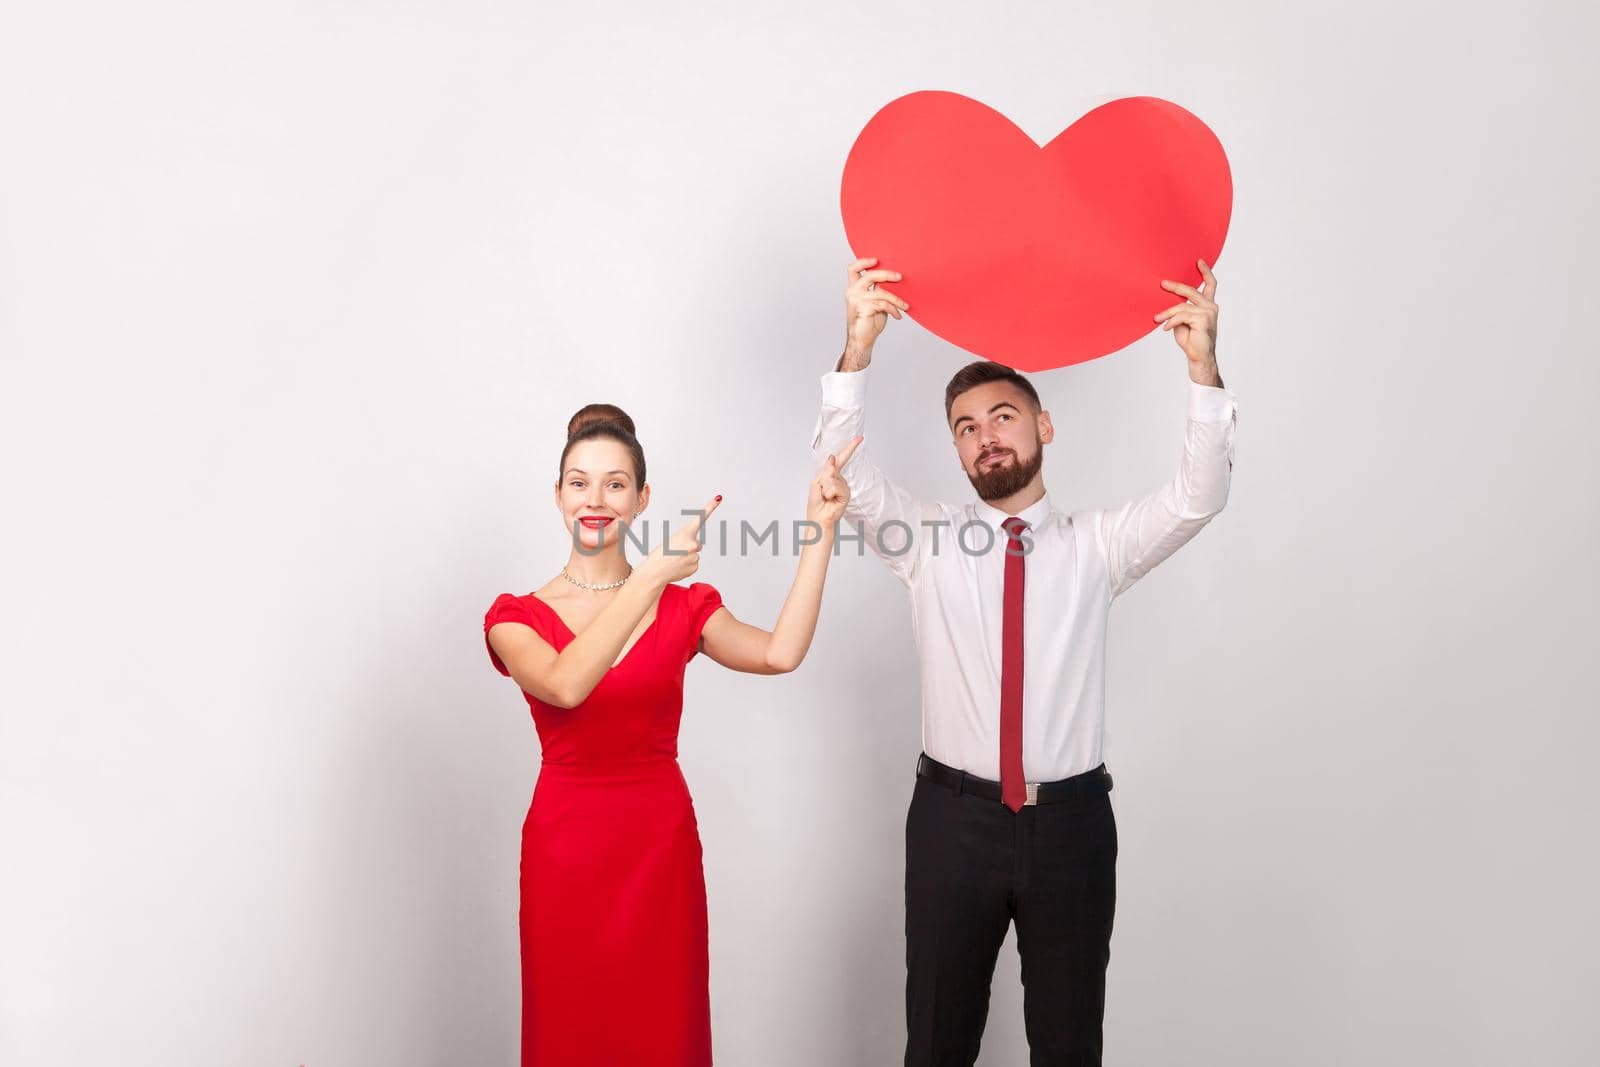 Woman pointing finger at big heart, man looking at heart. Indoor, studio shot, isolated on gray background